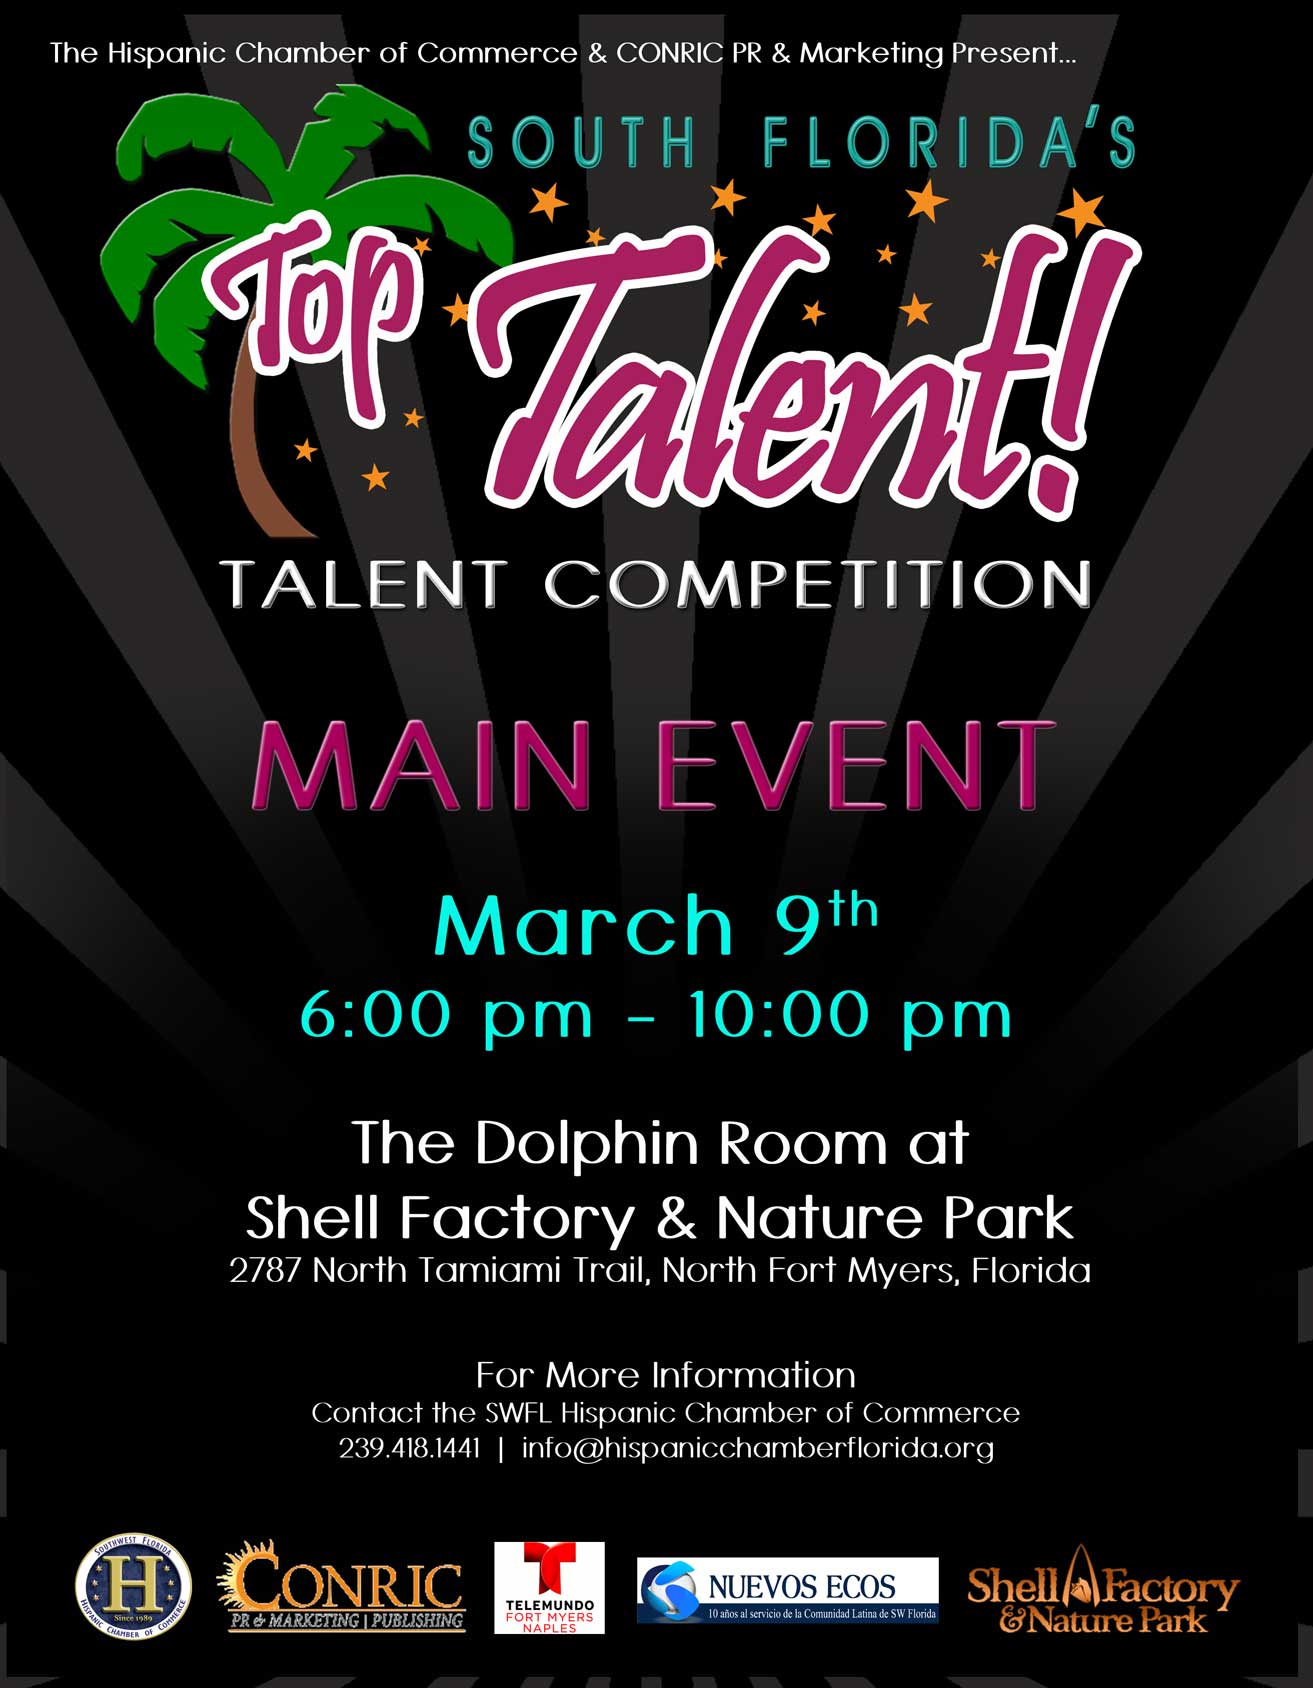 Everyone is Invited to Attend South Florida’s Top Talent! Competition Scheduled For March 9, 2013